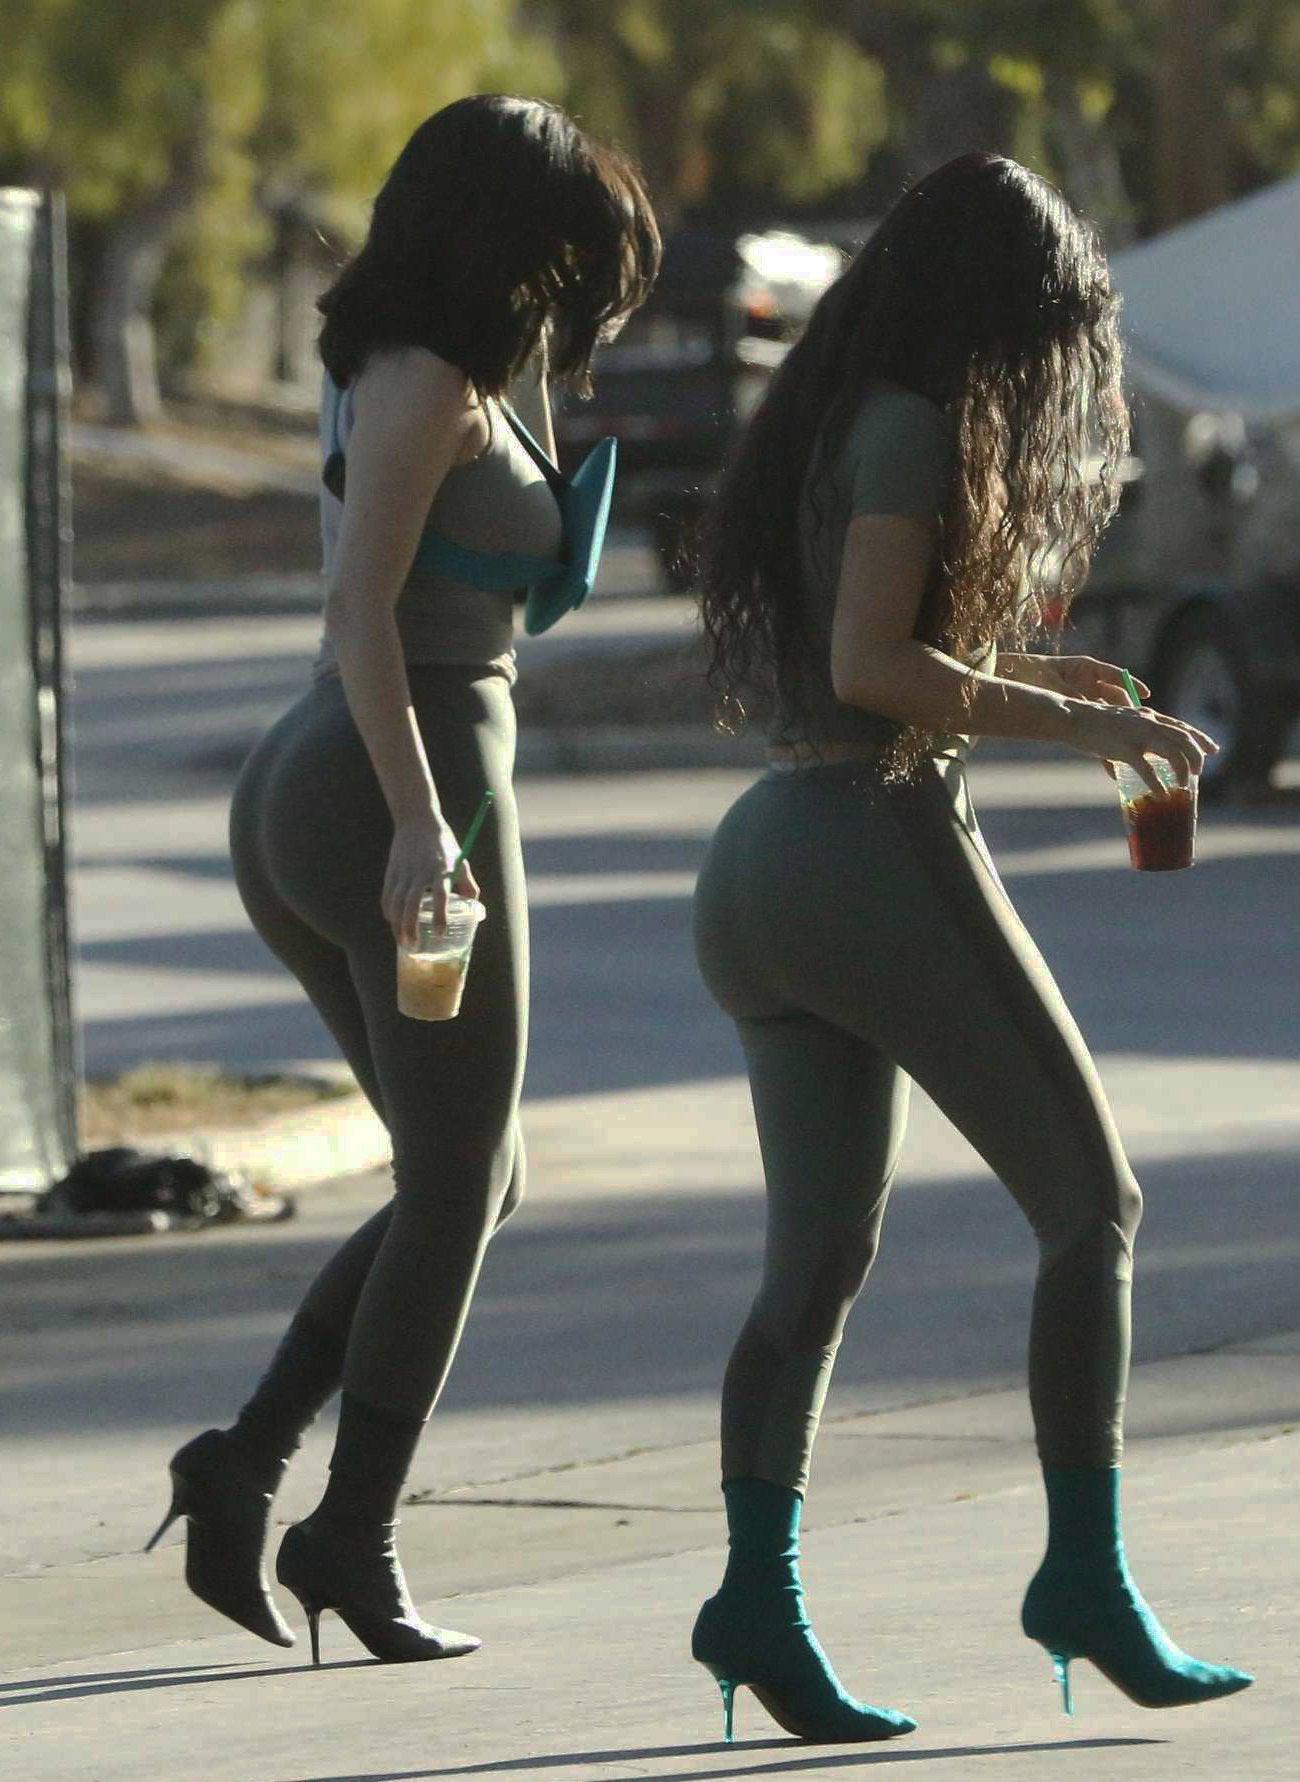 What do you guys think of Kylie Jenner and Kim Kardashian?